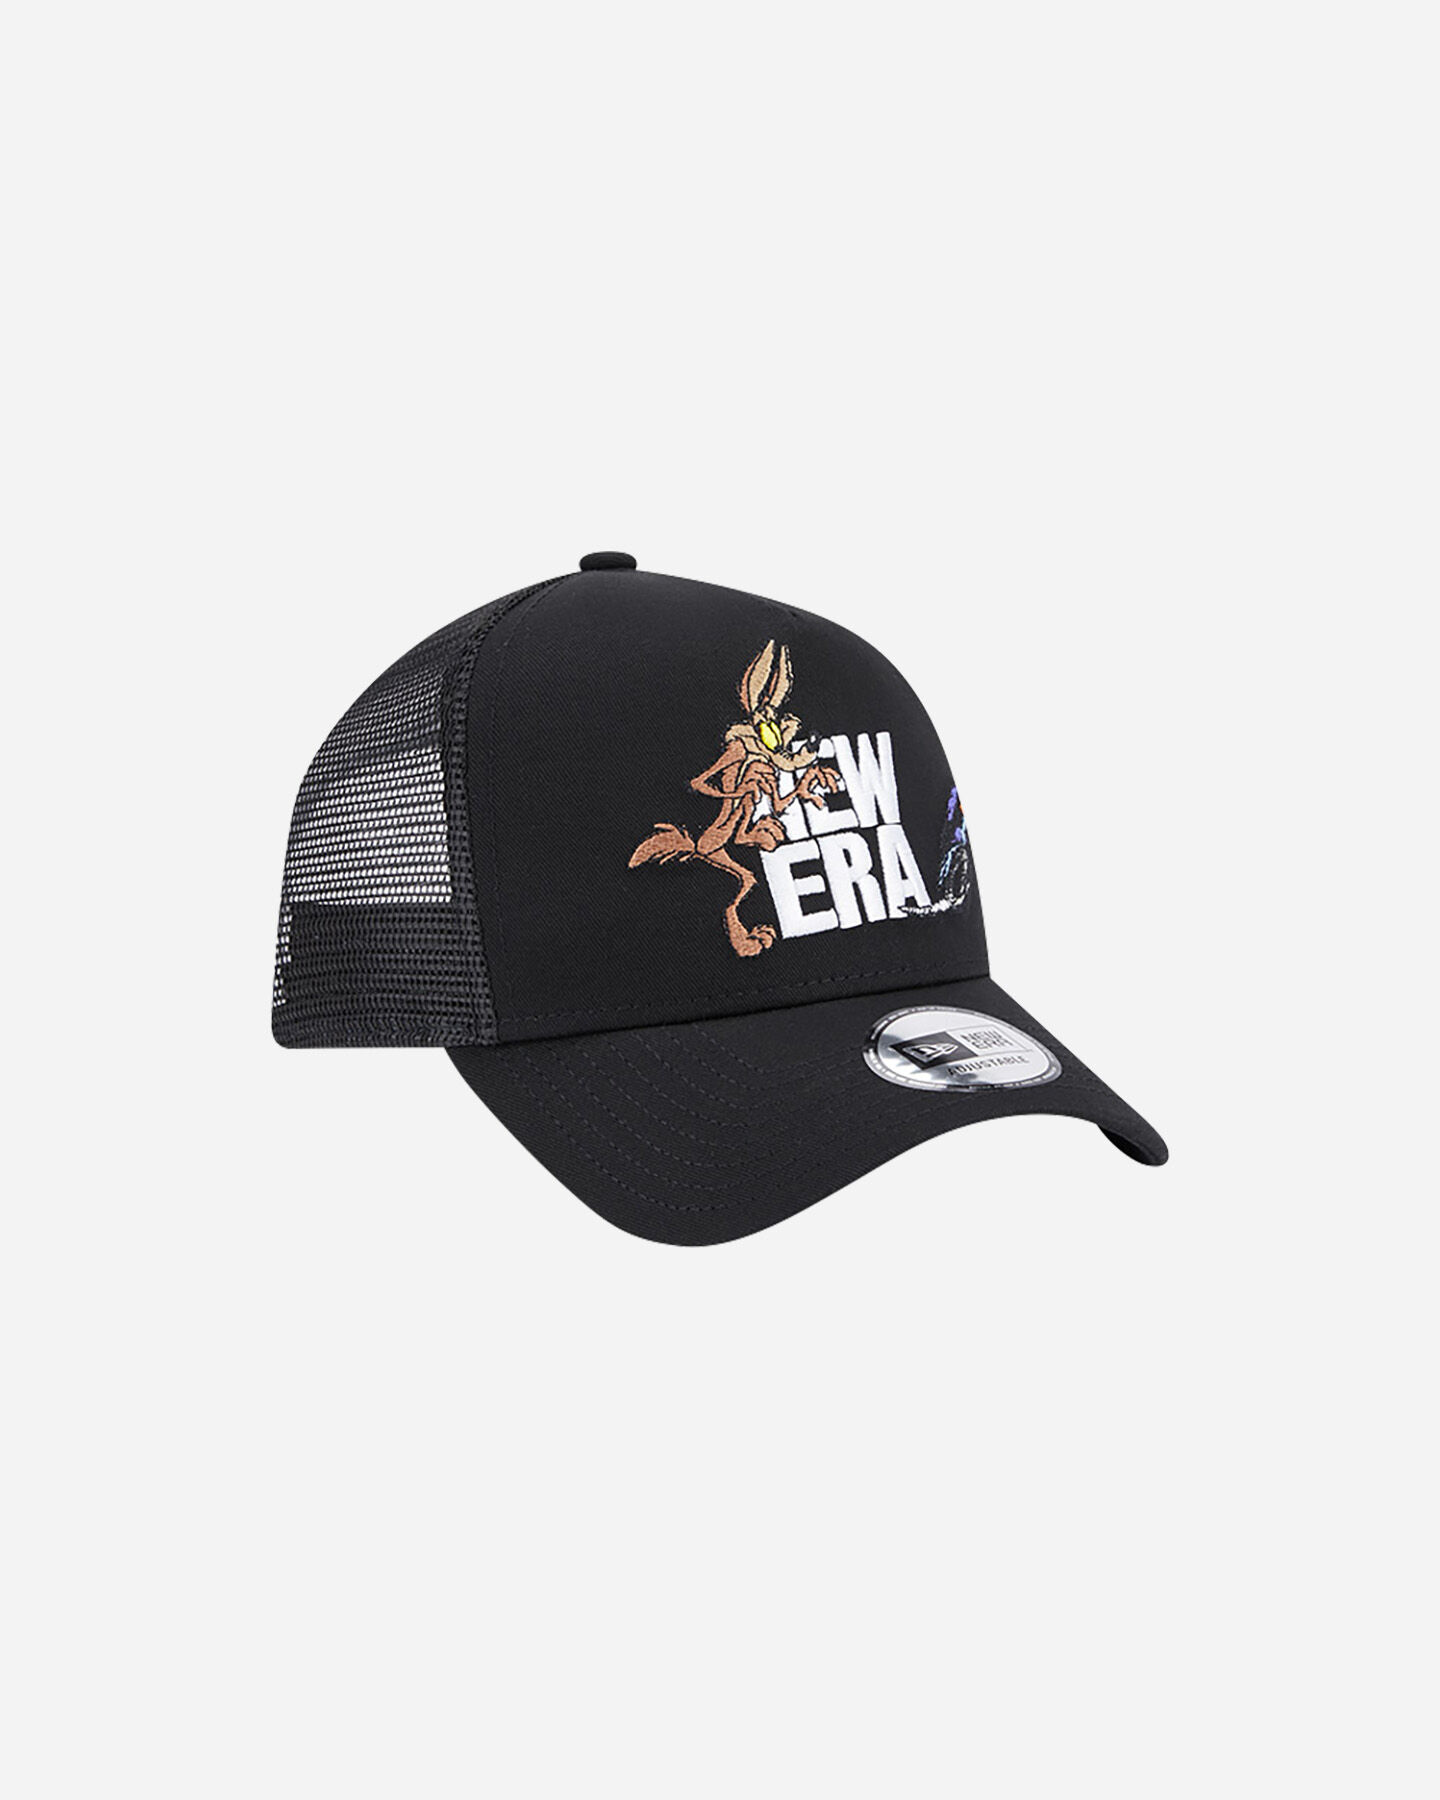  Cappellino NEW ERA 9FORTY TRUCKER WARNER BROS WILLY COYOTE  S5606092|001|OSFM scatto 2